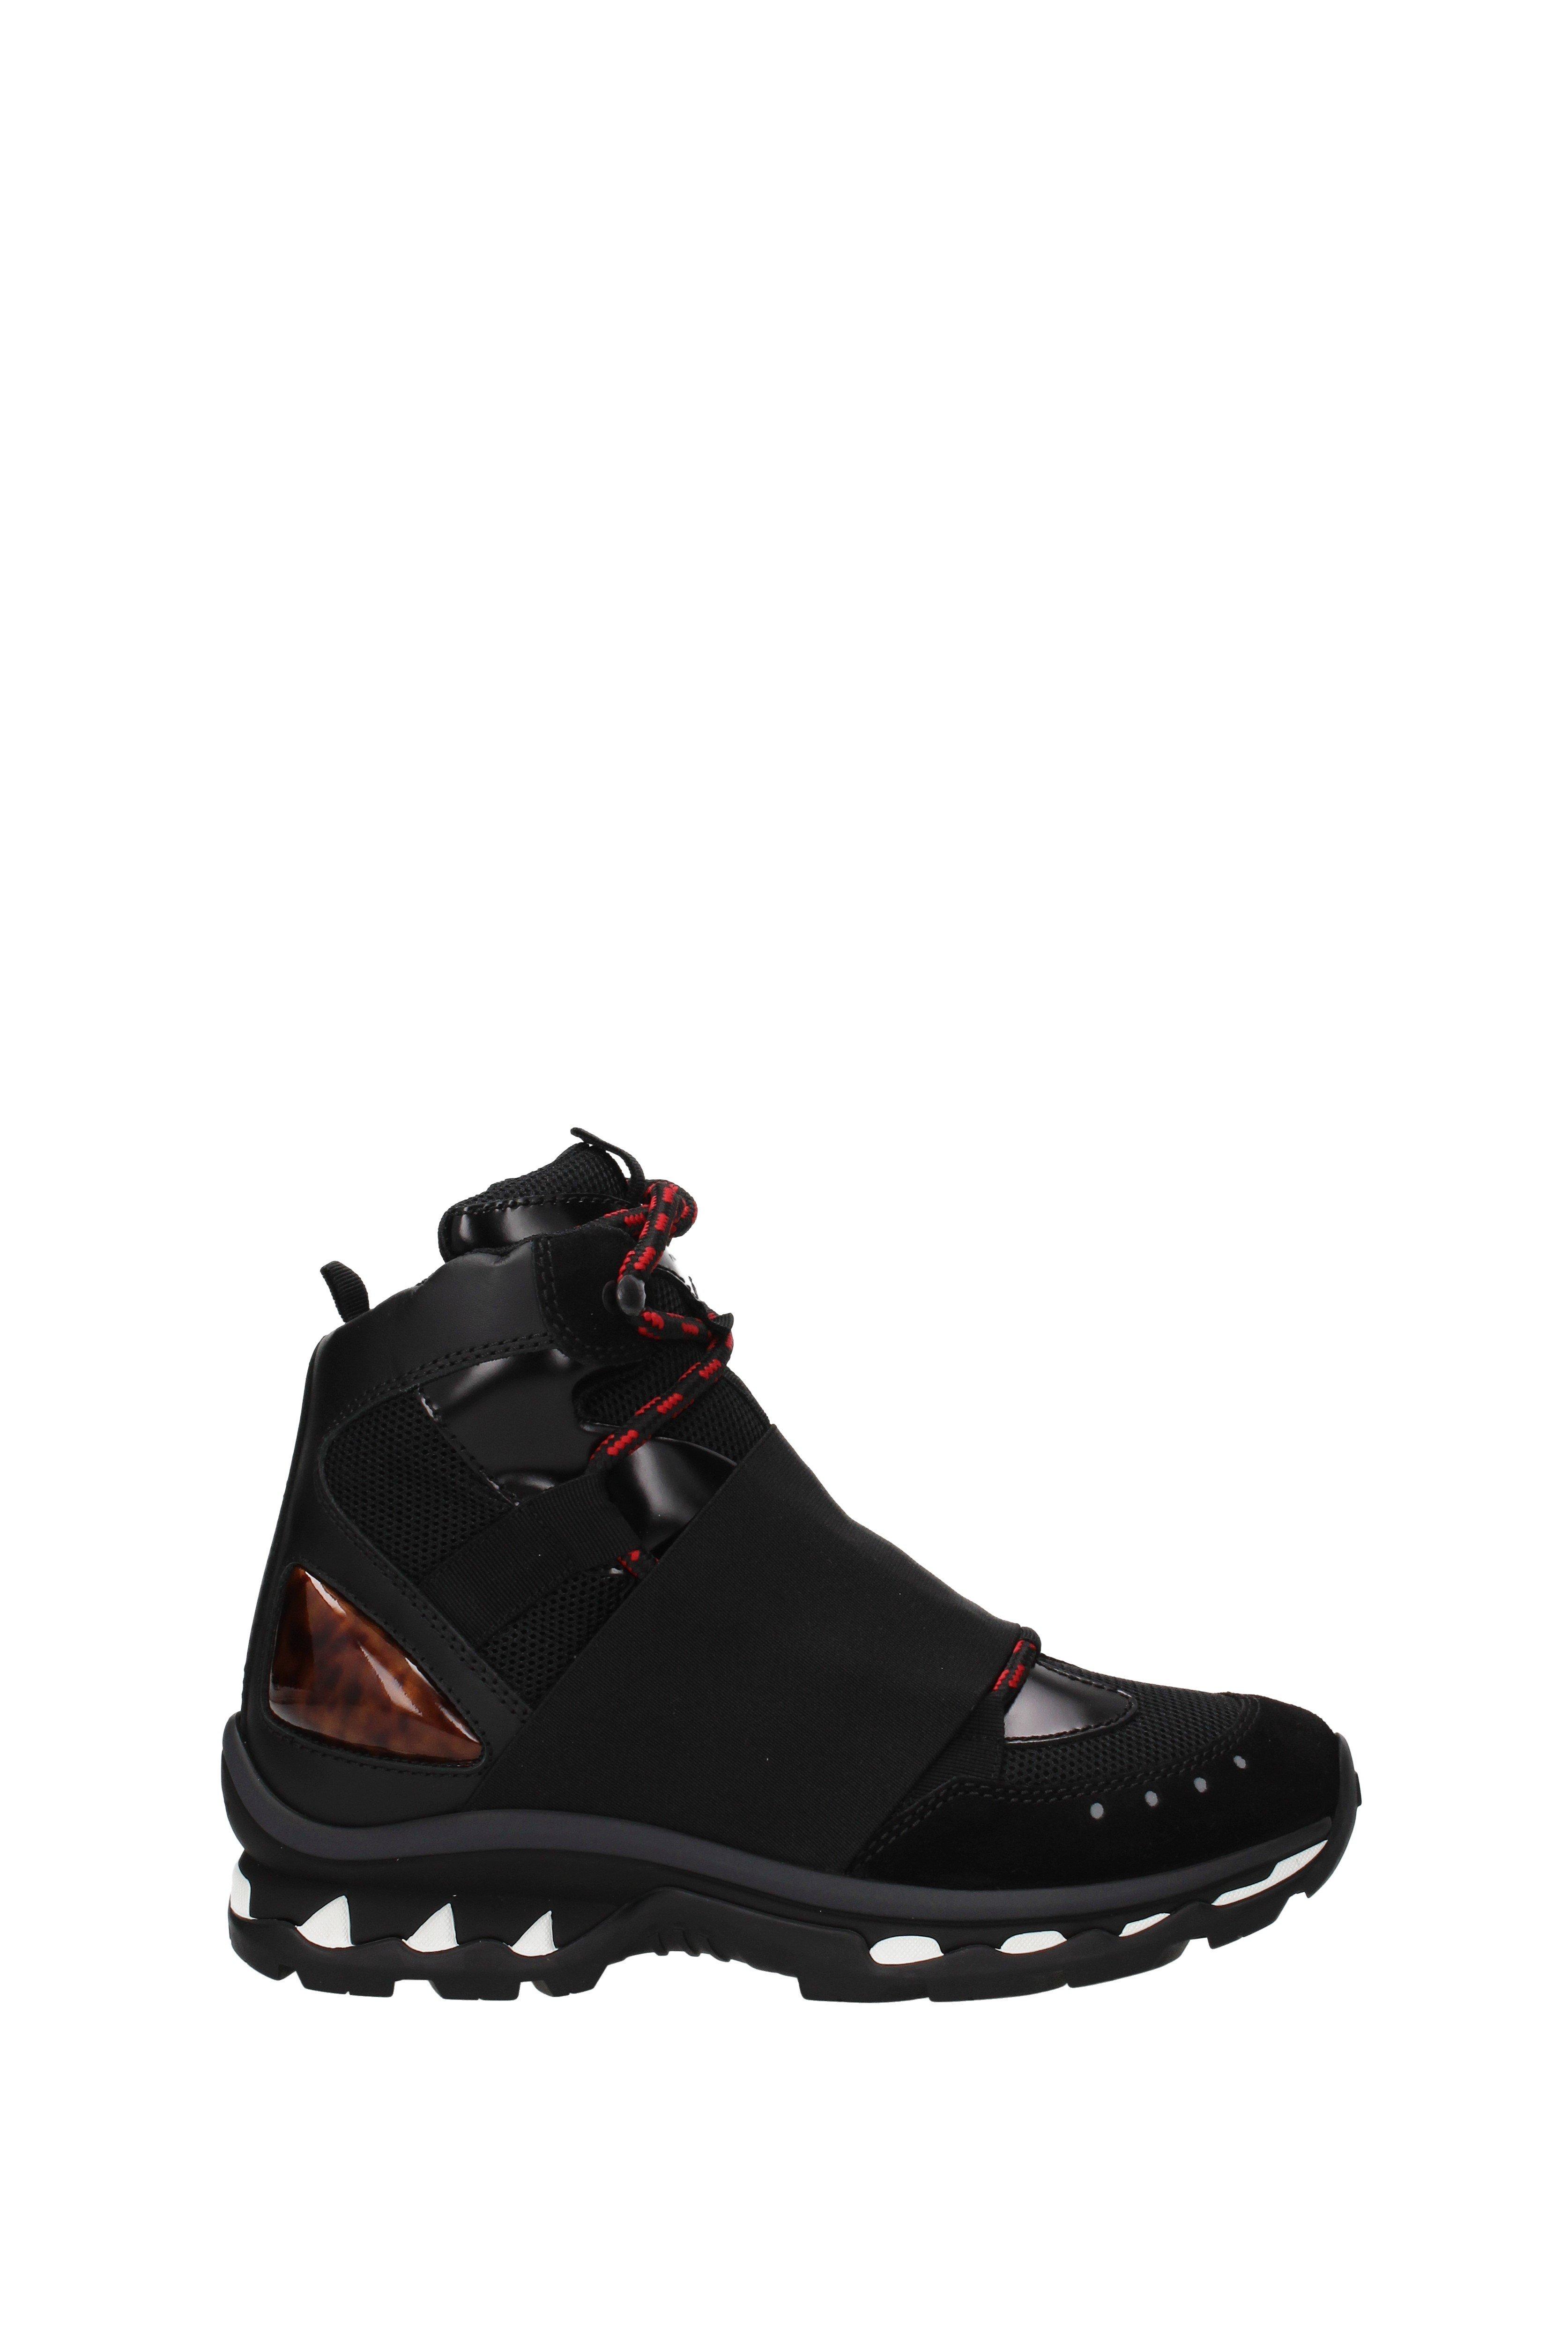 givenchy ankle boots mens